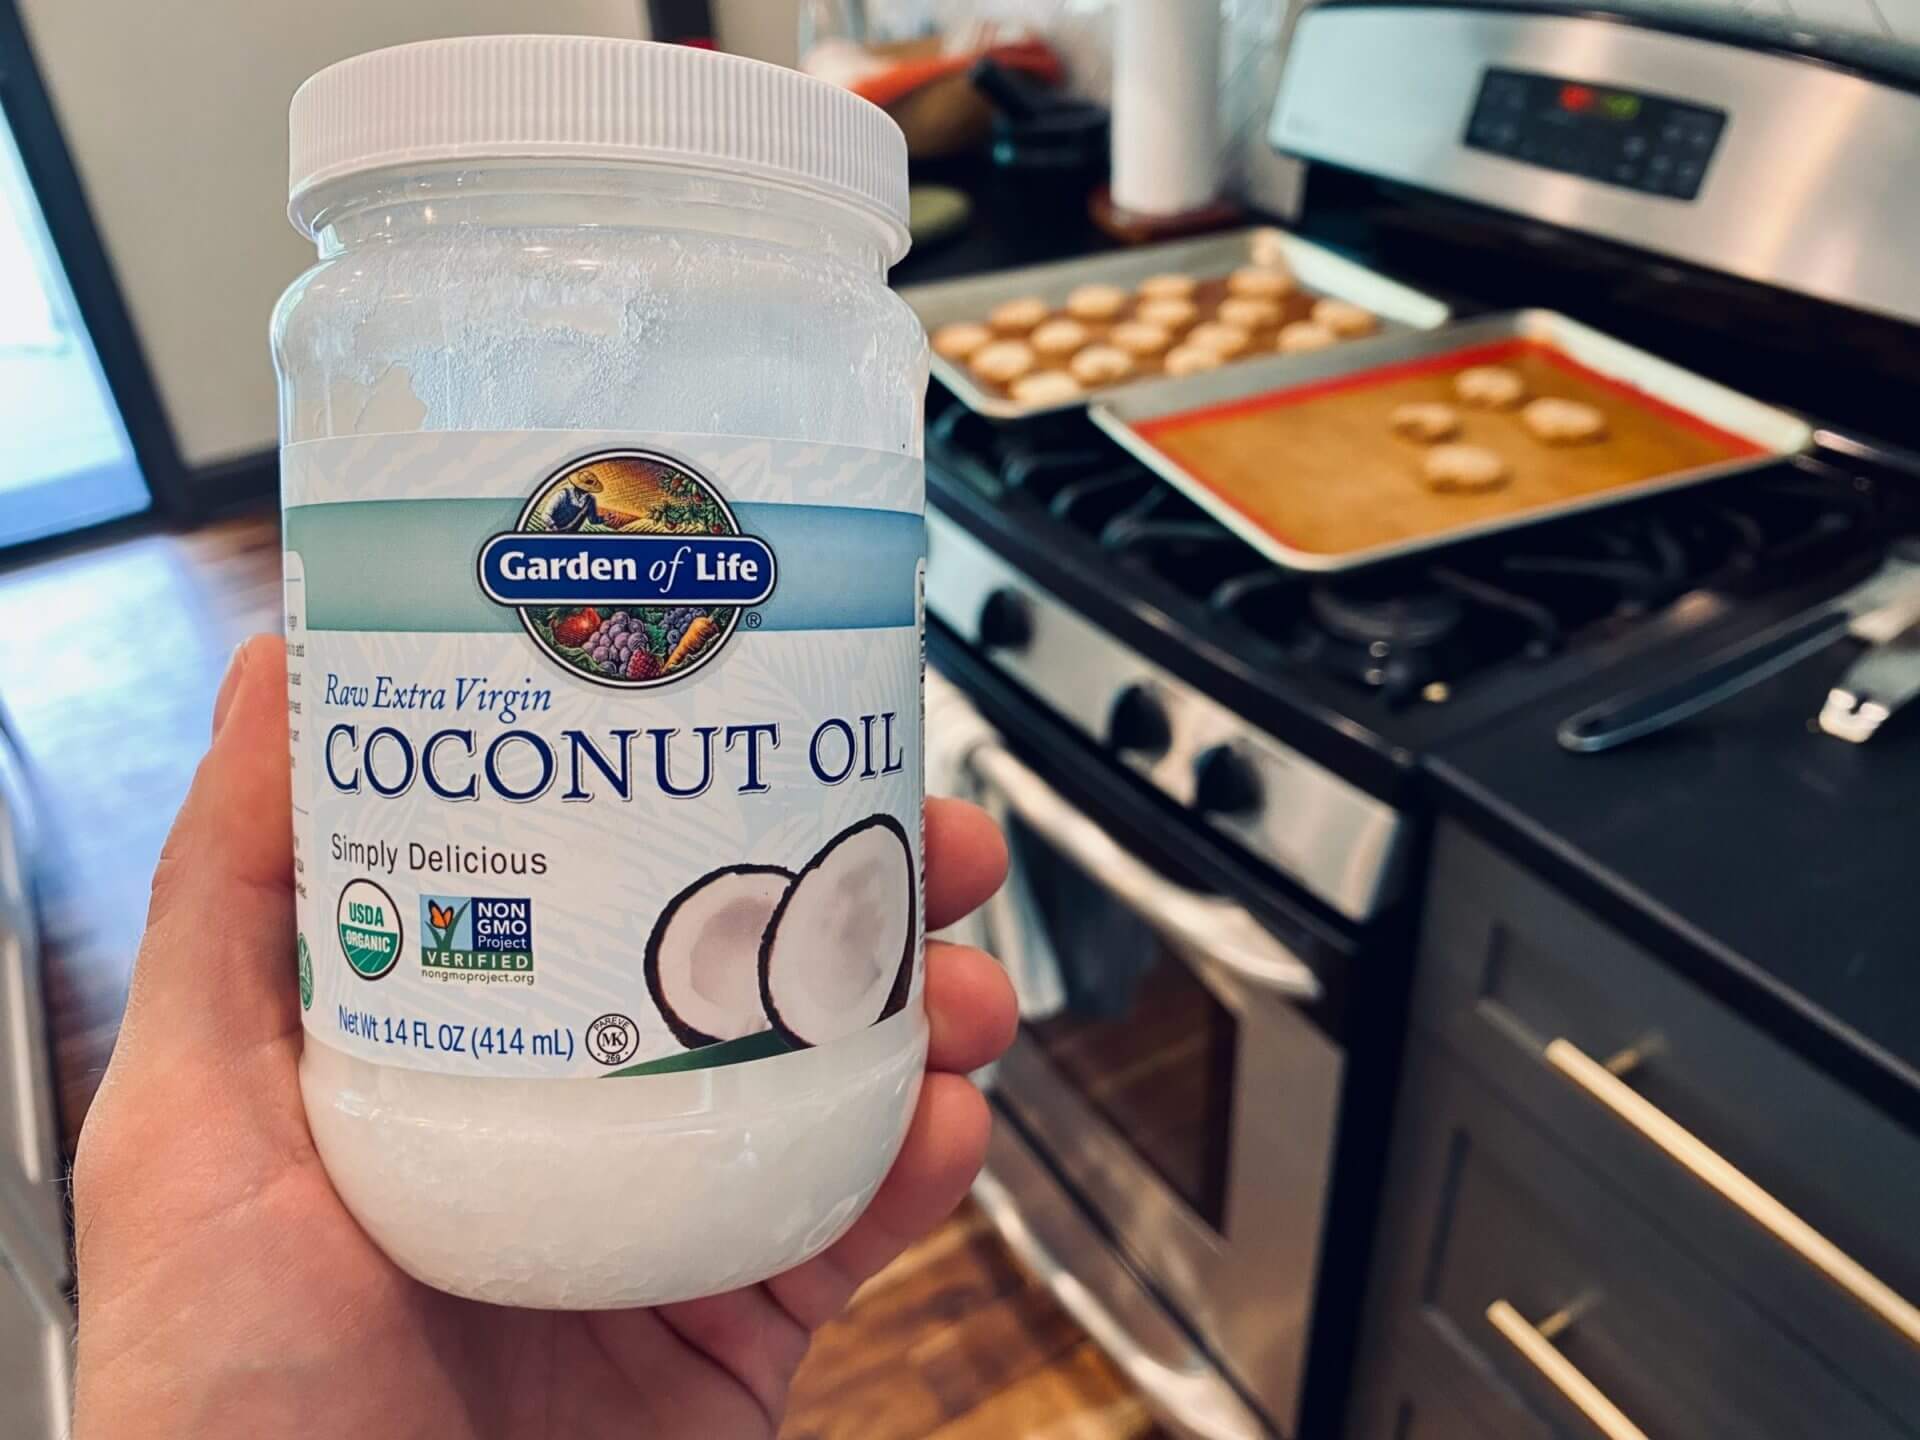 Coconut oil from Whole Foods